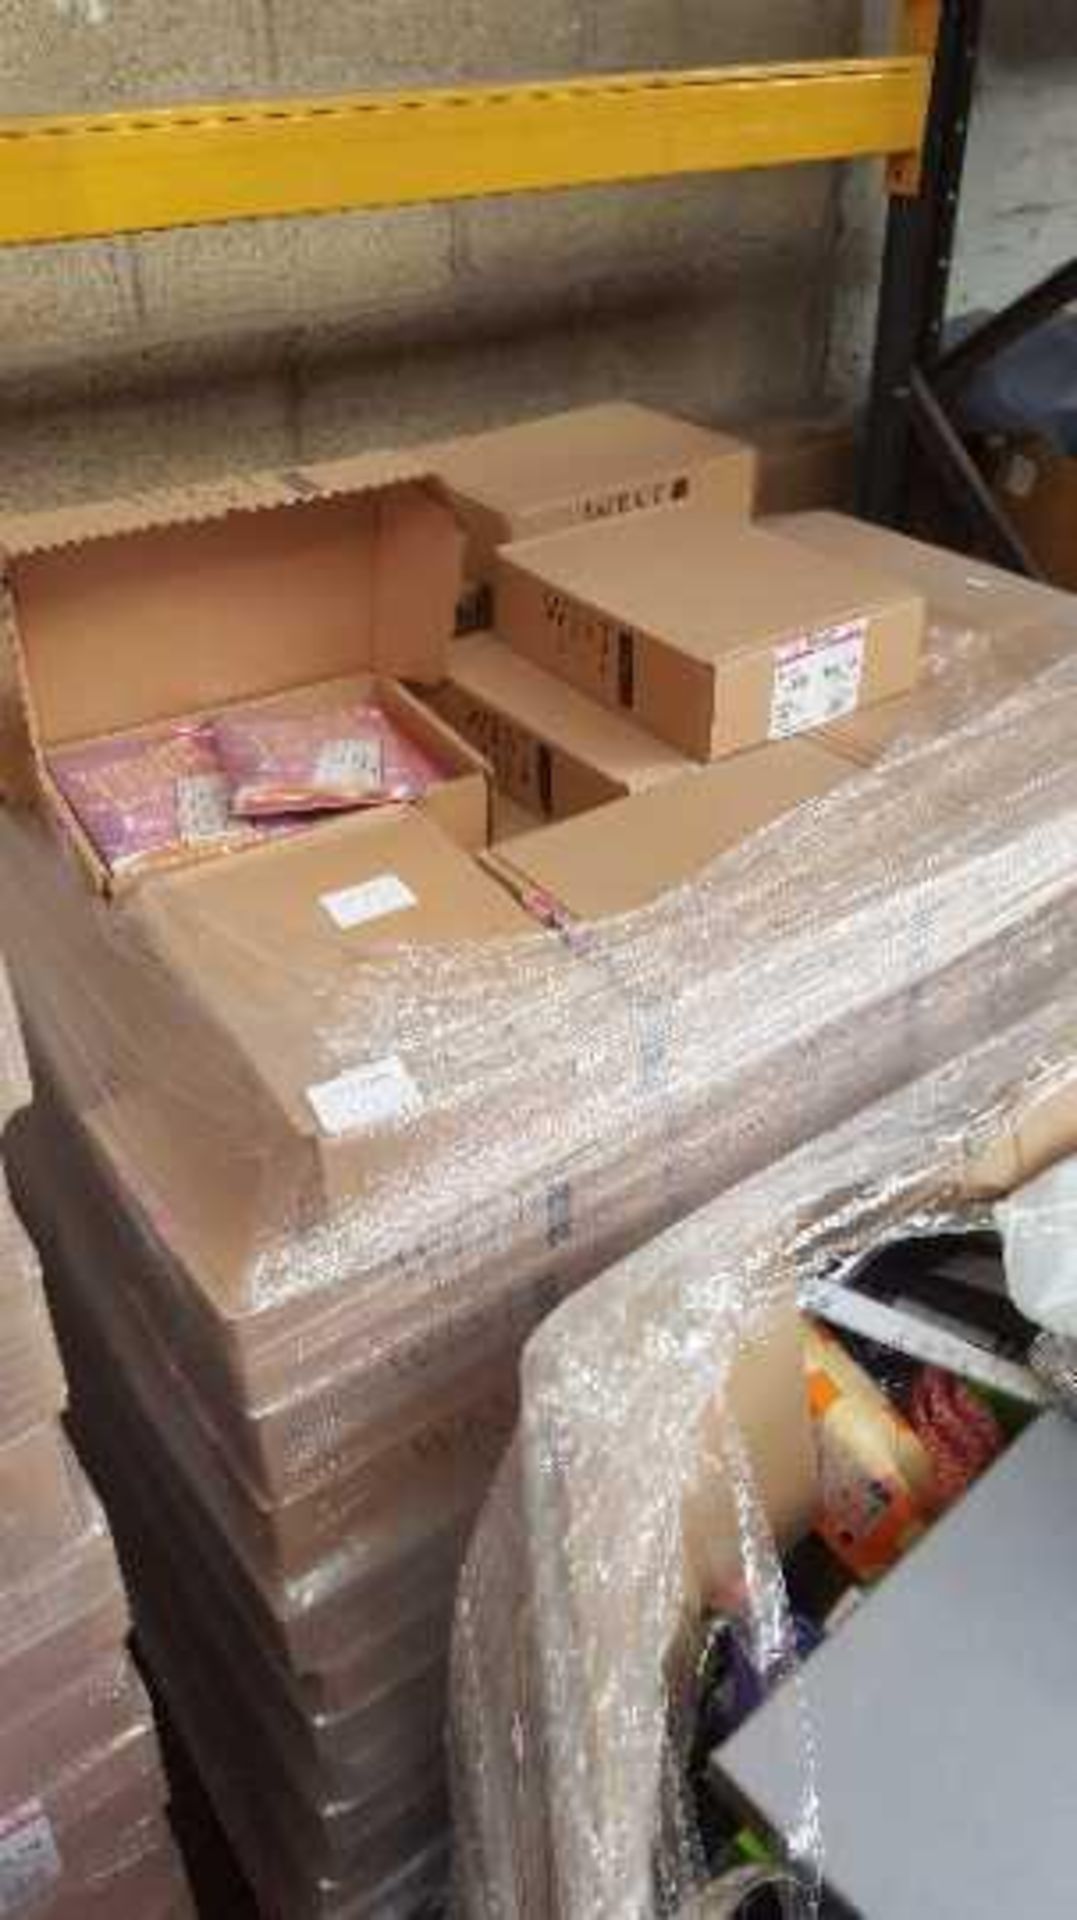 Pallet of approx 90 boxes with 72 Cards per box of various types of greetings cards and envelopes,